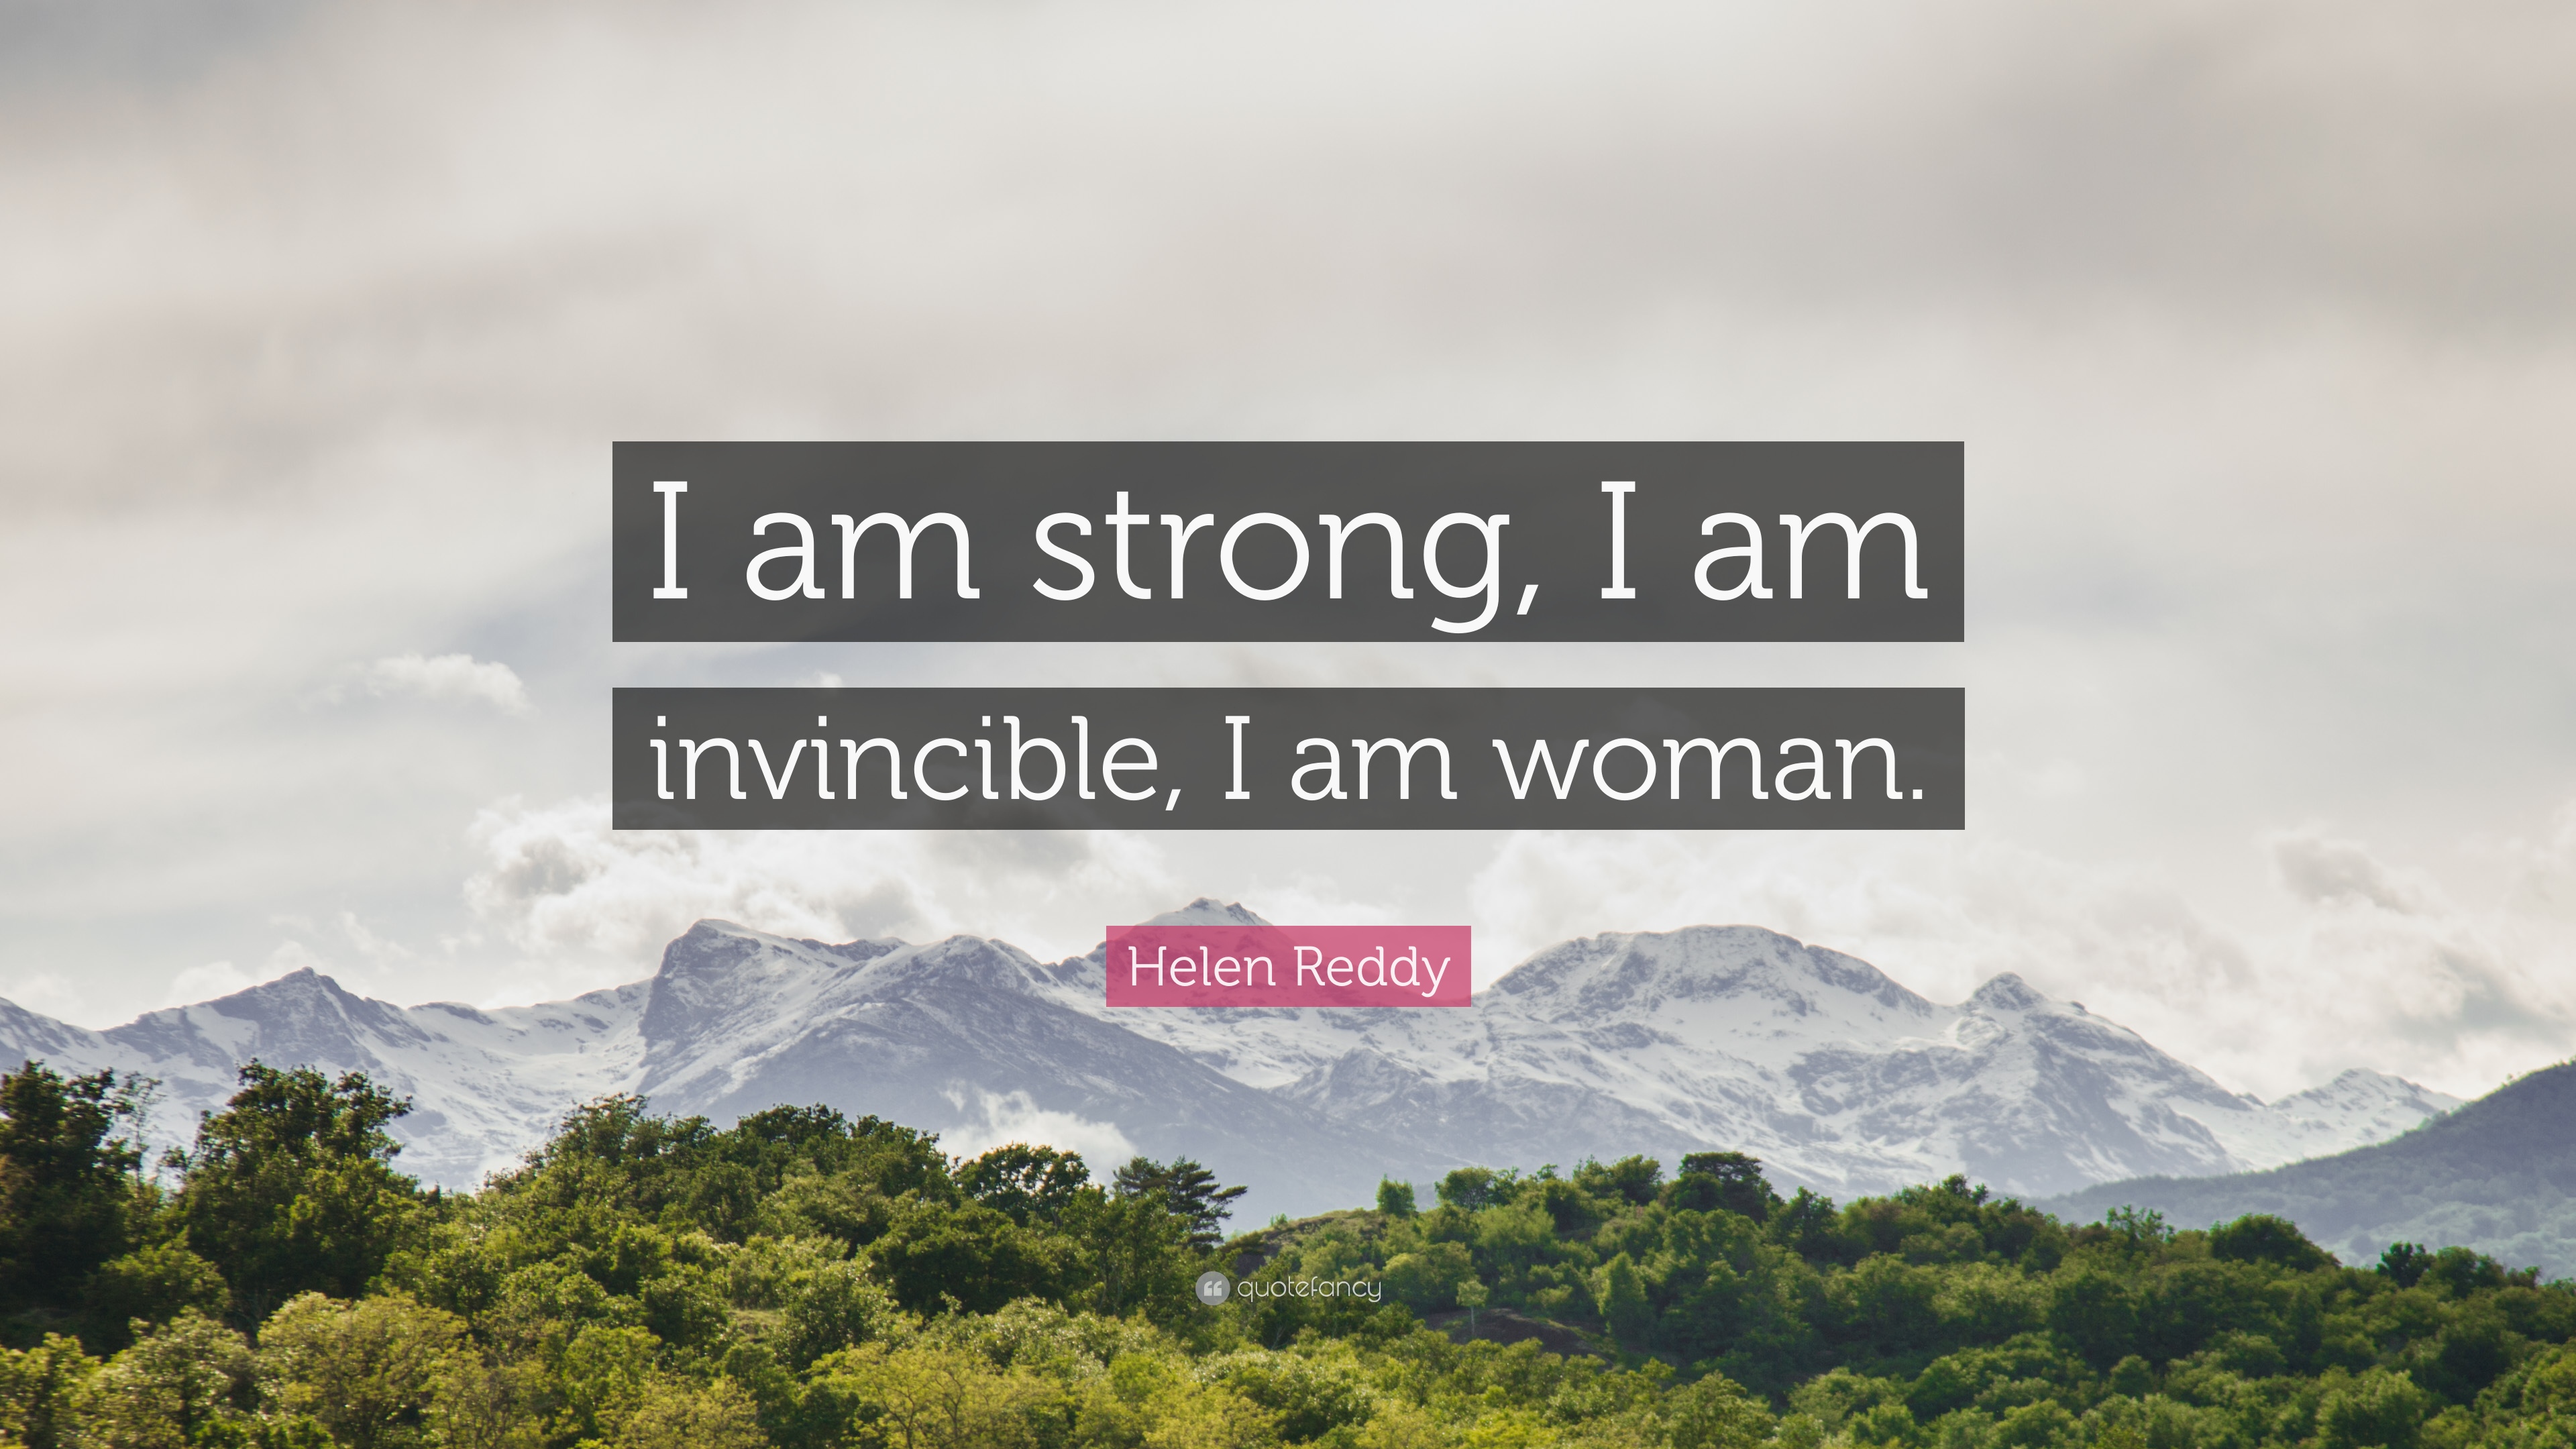 I Am Strong Wallpapers